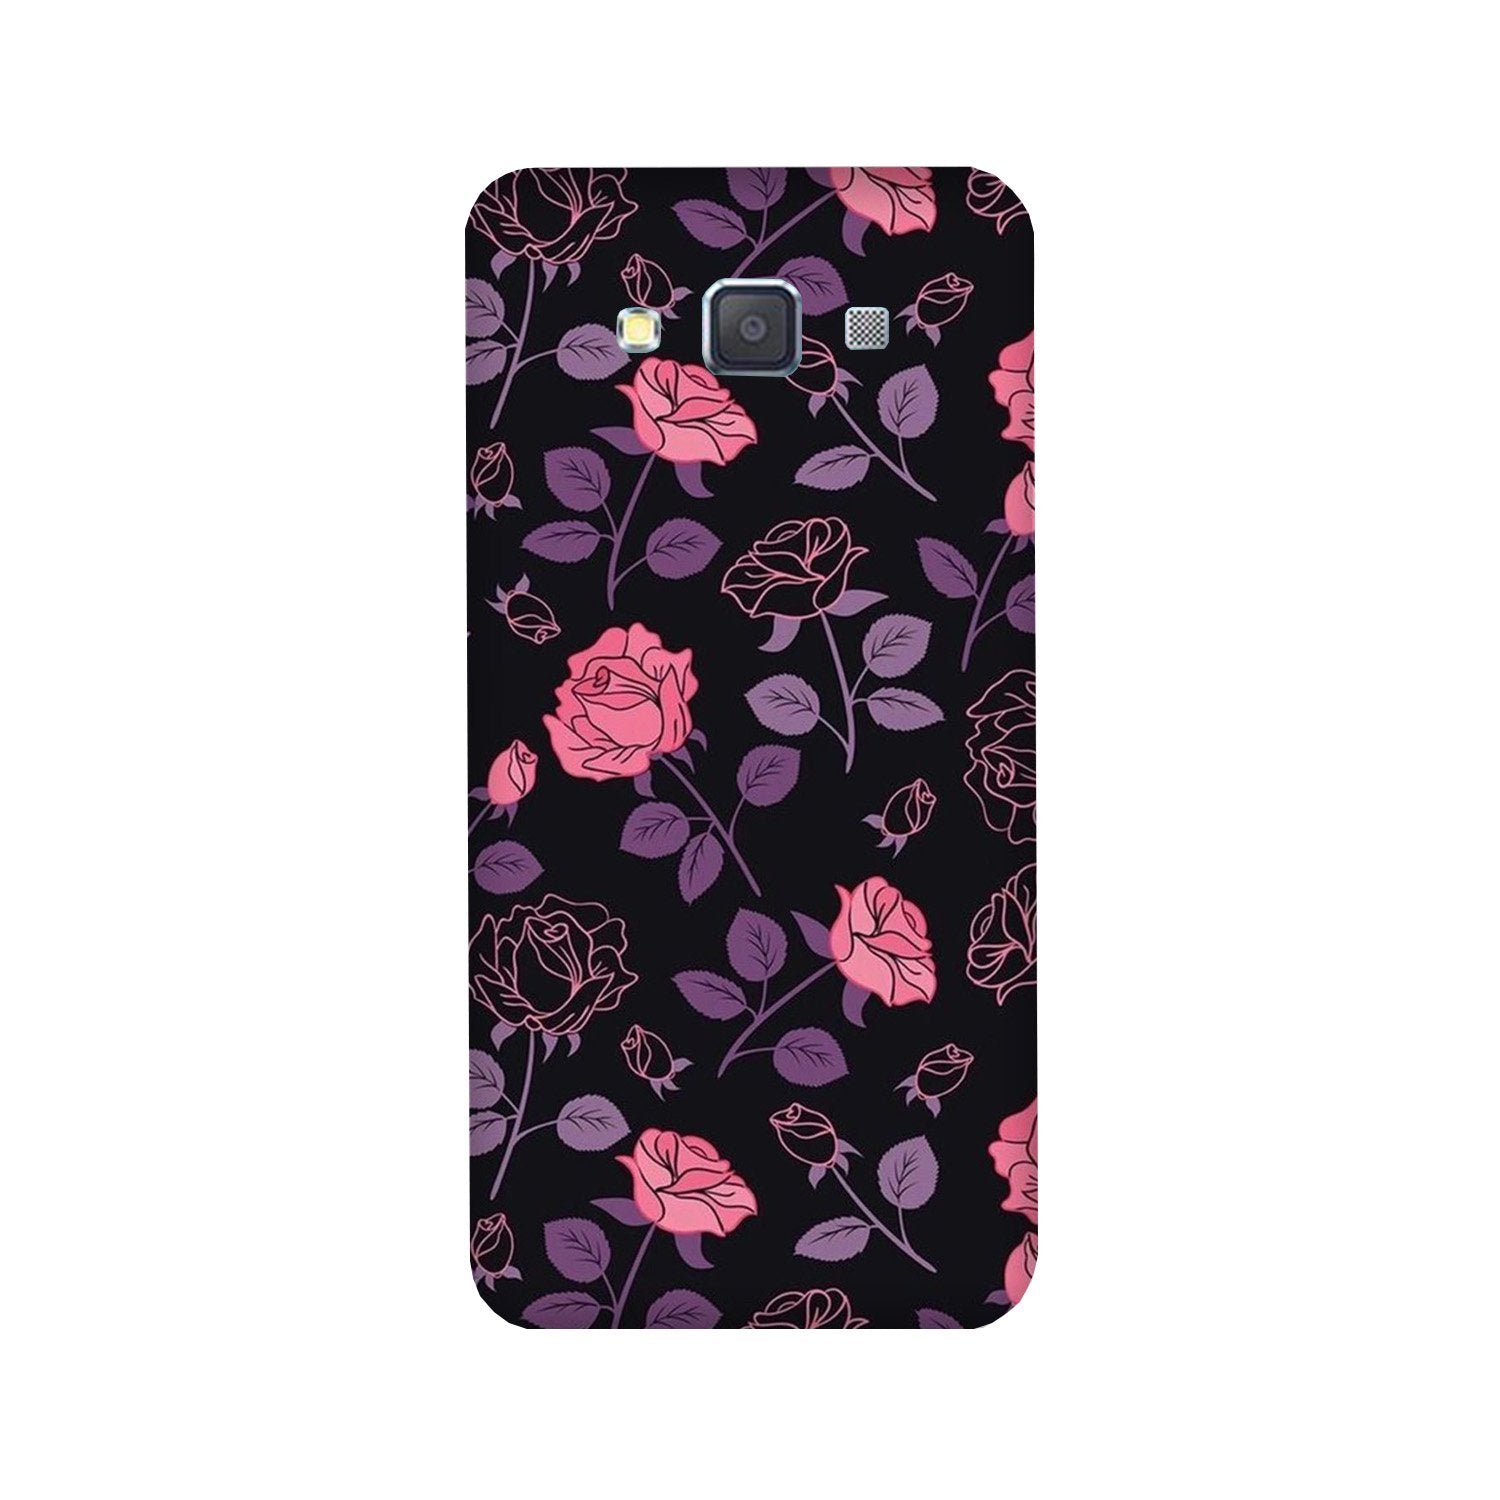 Rose Pattern Case for Galaxy Grand Max